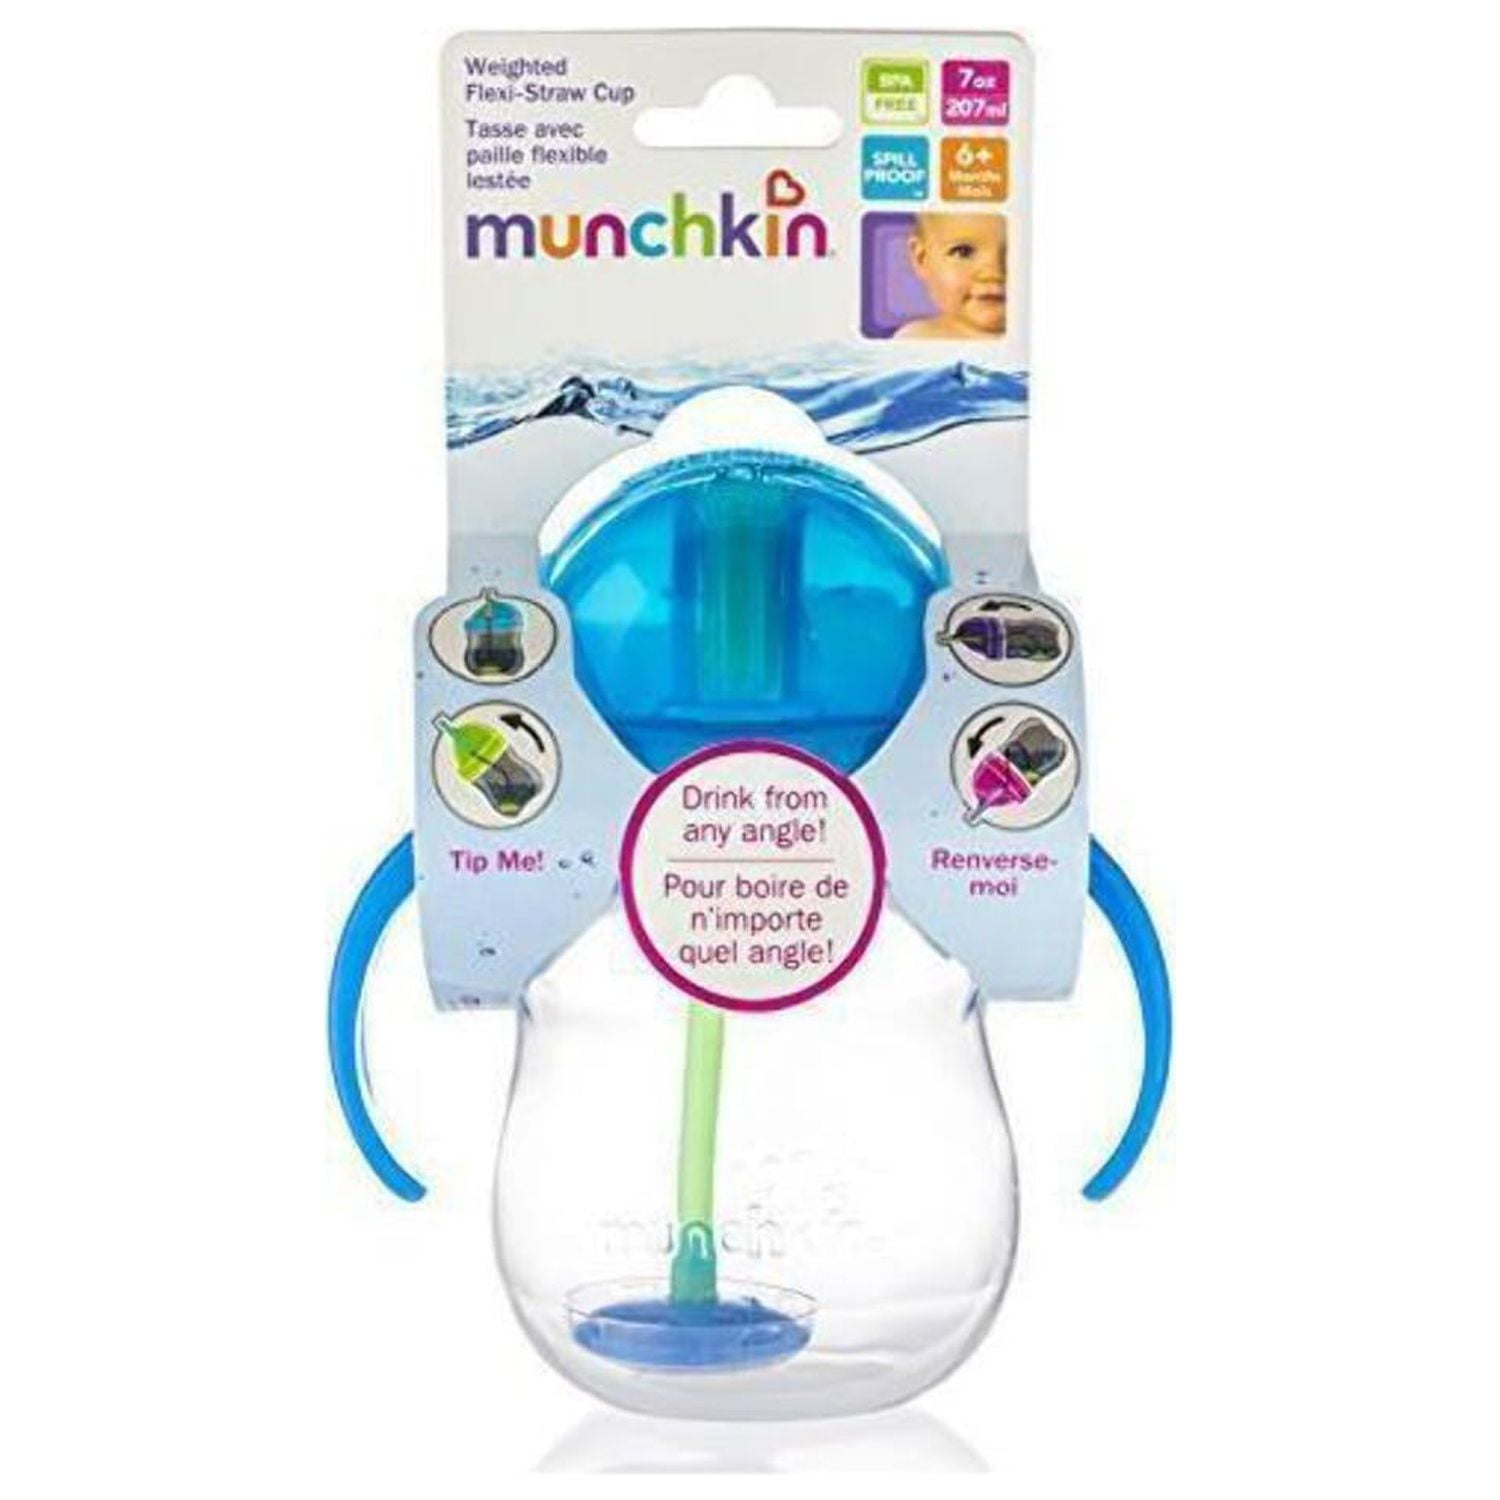 Munchkin® Click-Lock 7 oz. Weighted Flexi-Straw Cup in Pink, 7 oz